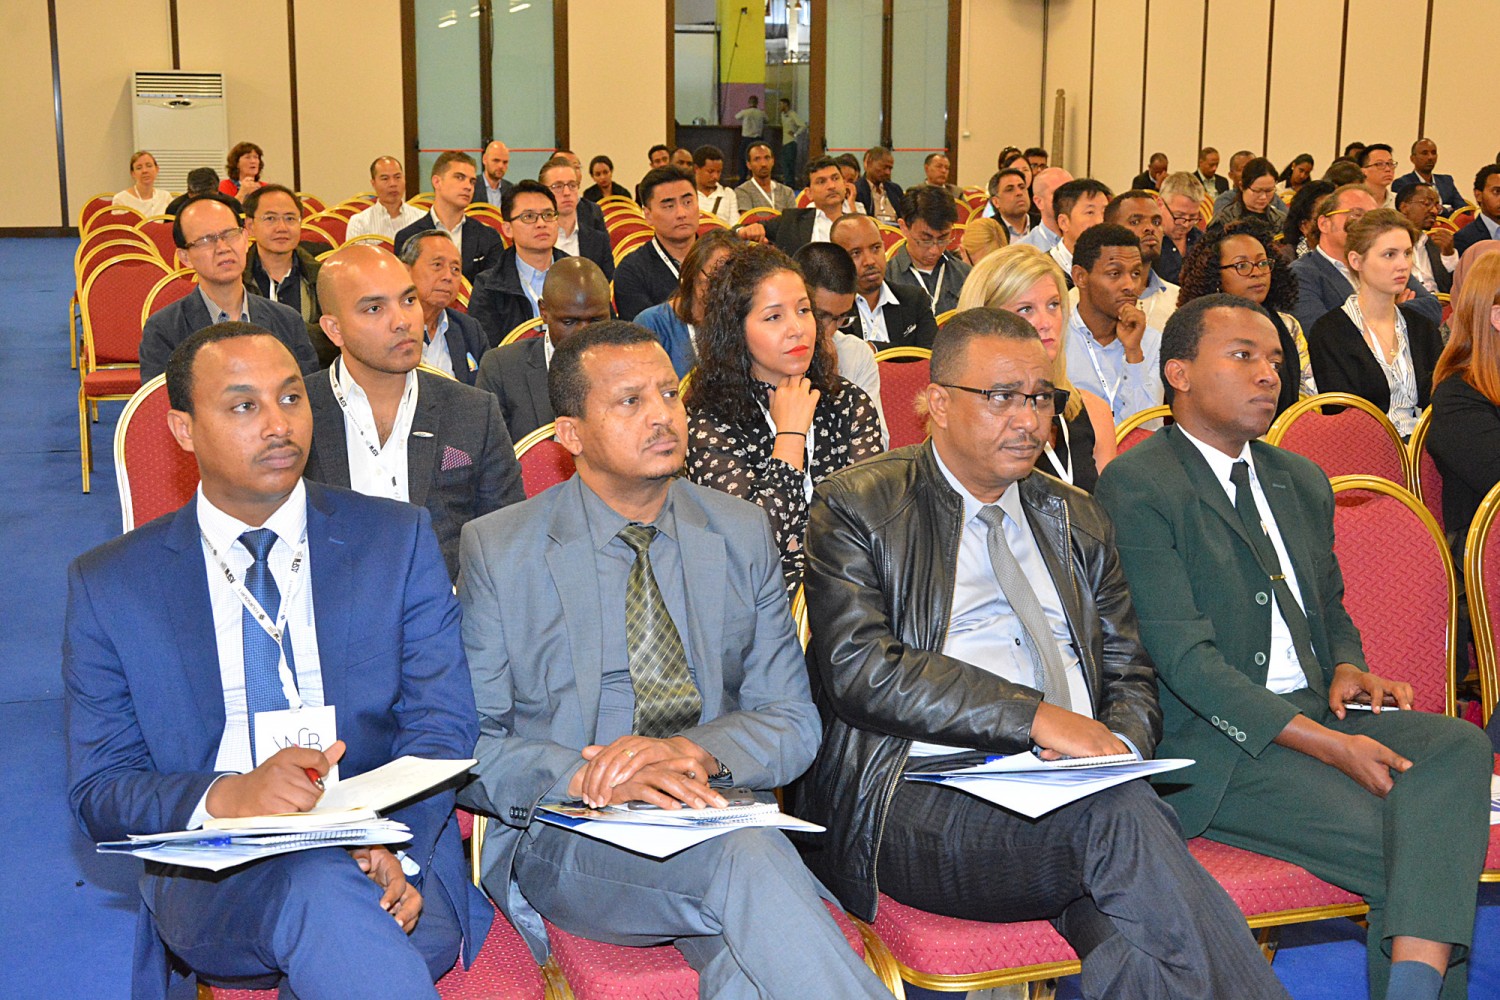 ASFW’s conference takes up the topic of investment by a panel presented by the government of Ethiopia. © ASFW